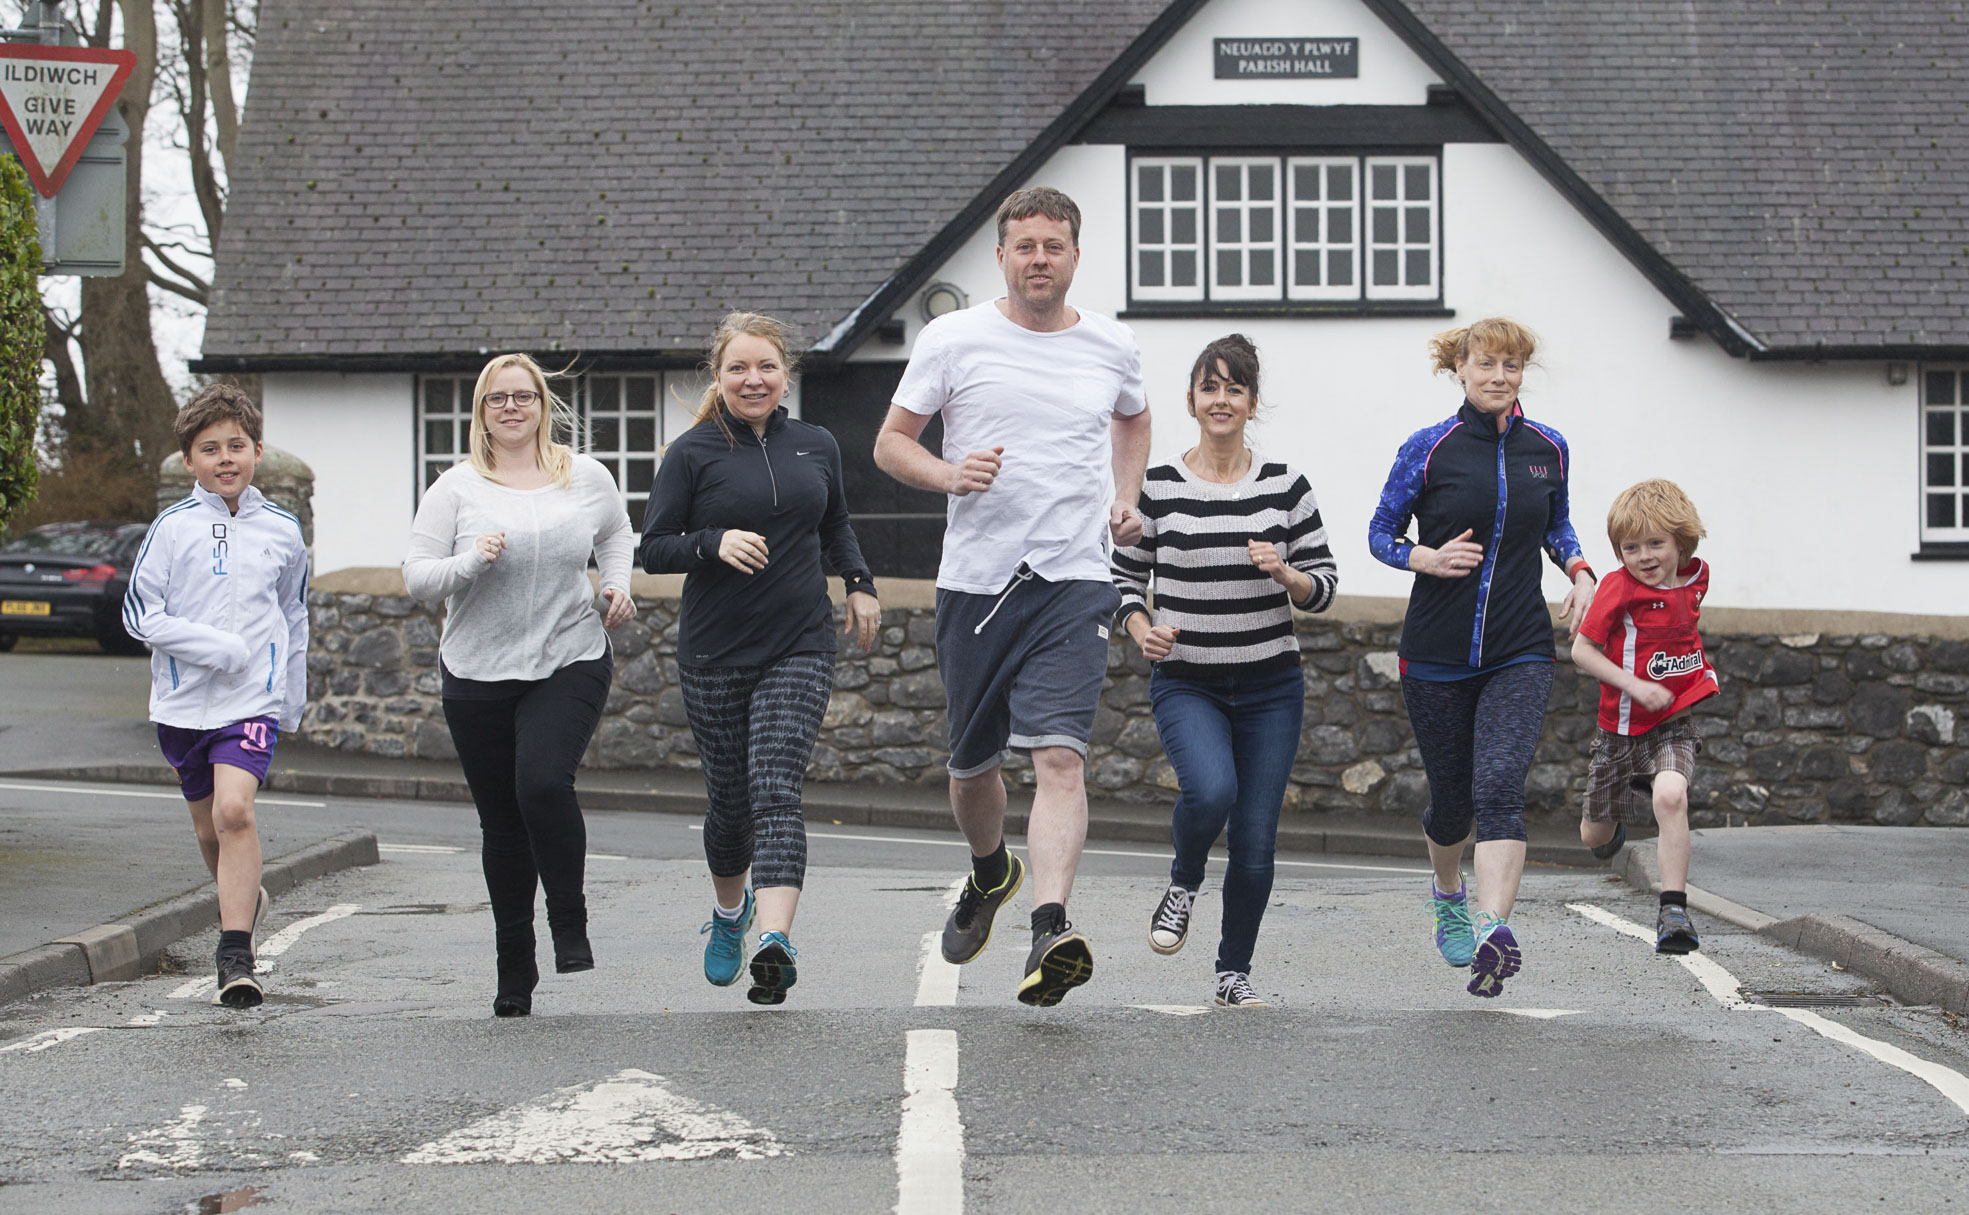 Athletic villagers gear up for charity run challenge